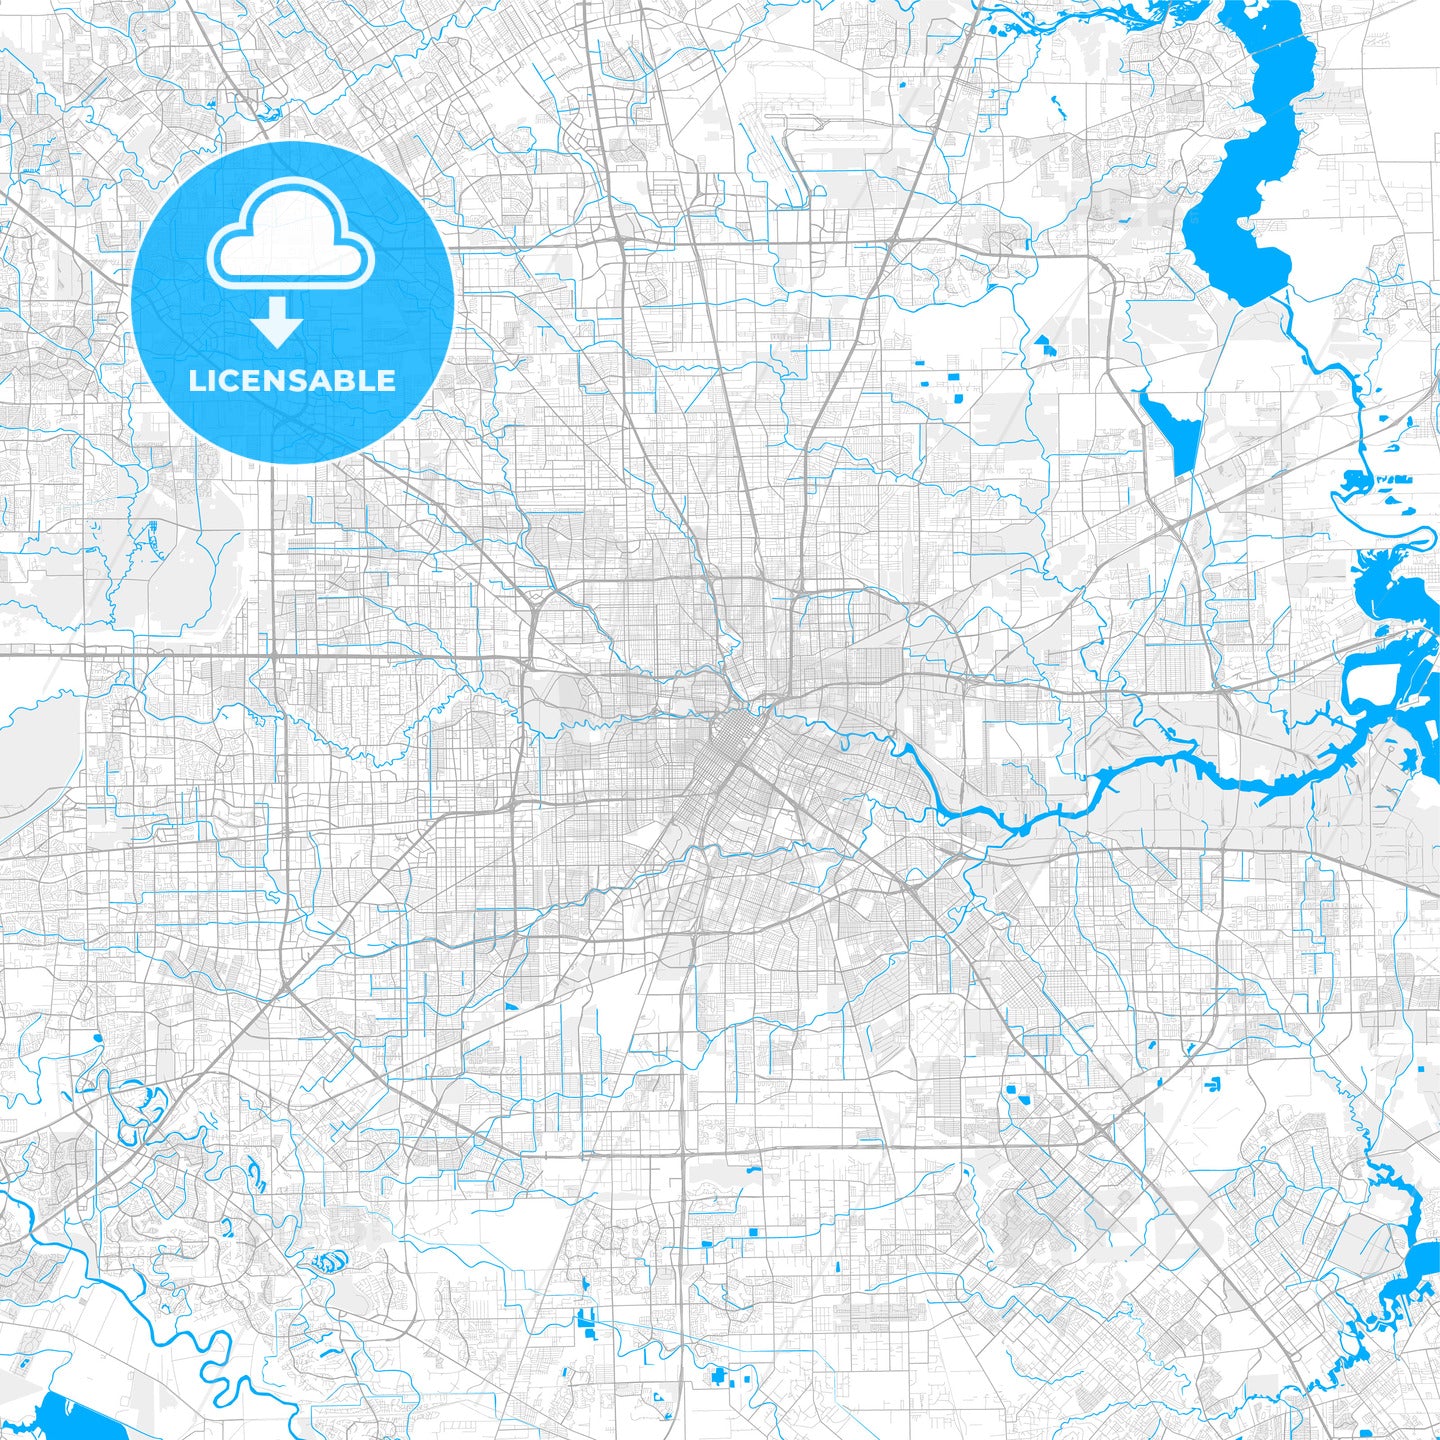 Rich detailed vector map of Houston, Texas, U.S.A.